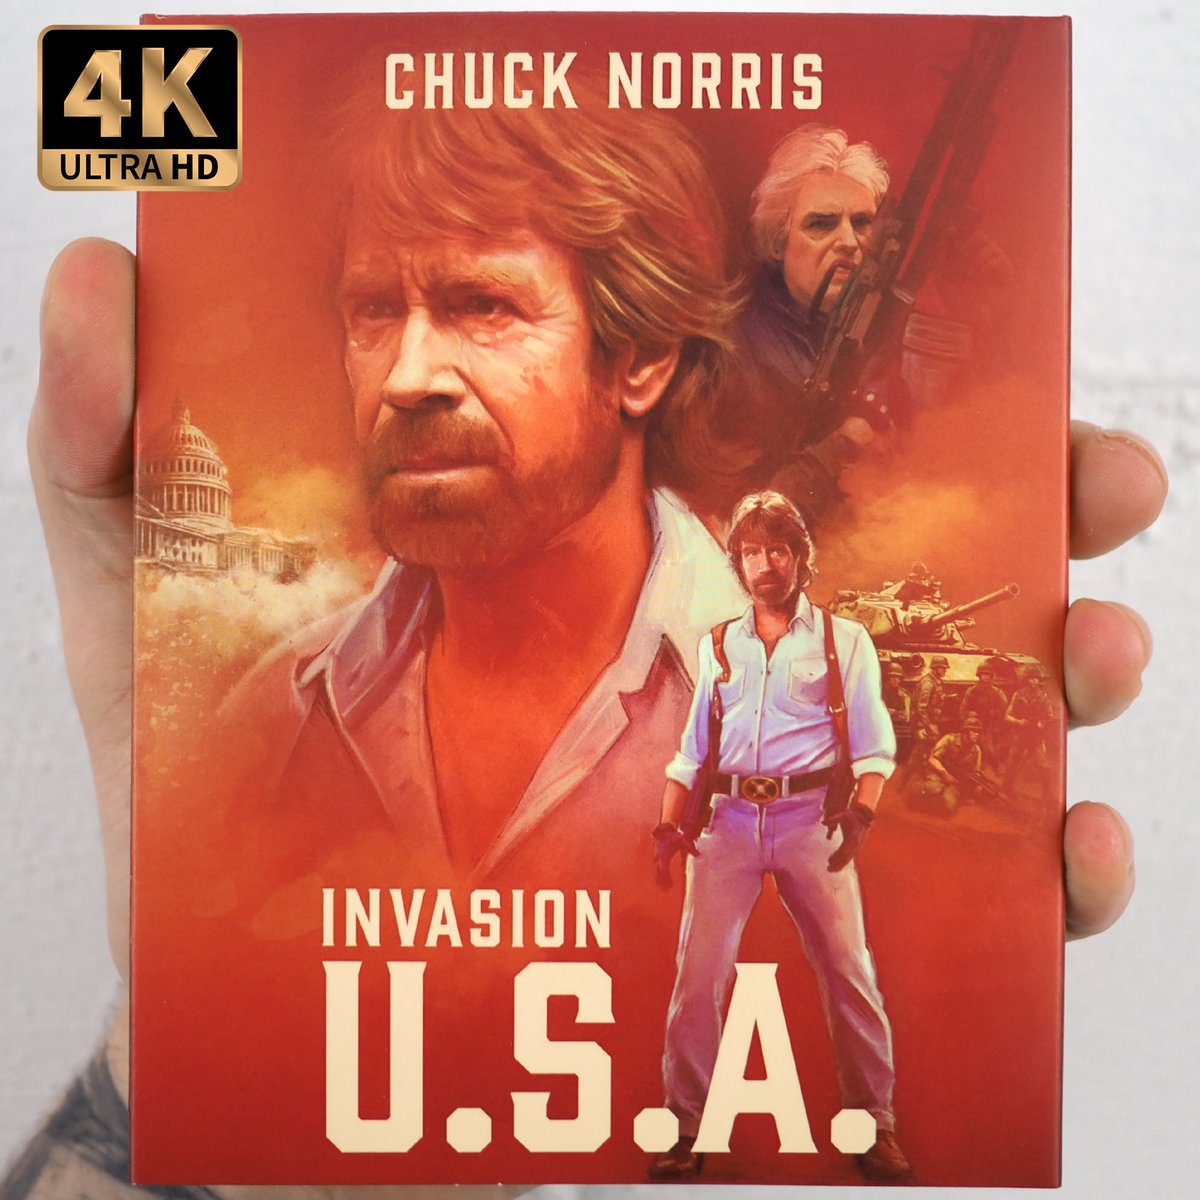 There's only one man capable of stopping a ruthless communist invasion and that's Chuck Norris, star of Joseph Zito's 80s action classic, from Cannon Films: INVASION U.S.A., which has fought its way to 4K UHD in a spectacular new restoration. vinegarsyndrome.com/products/invas…